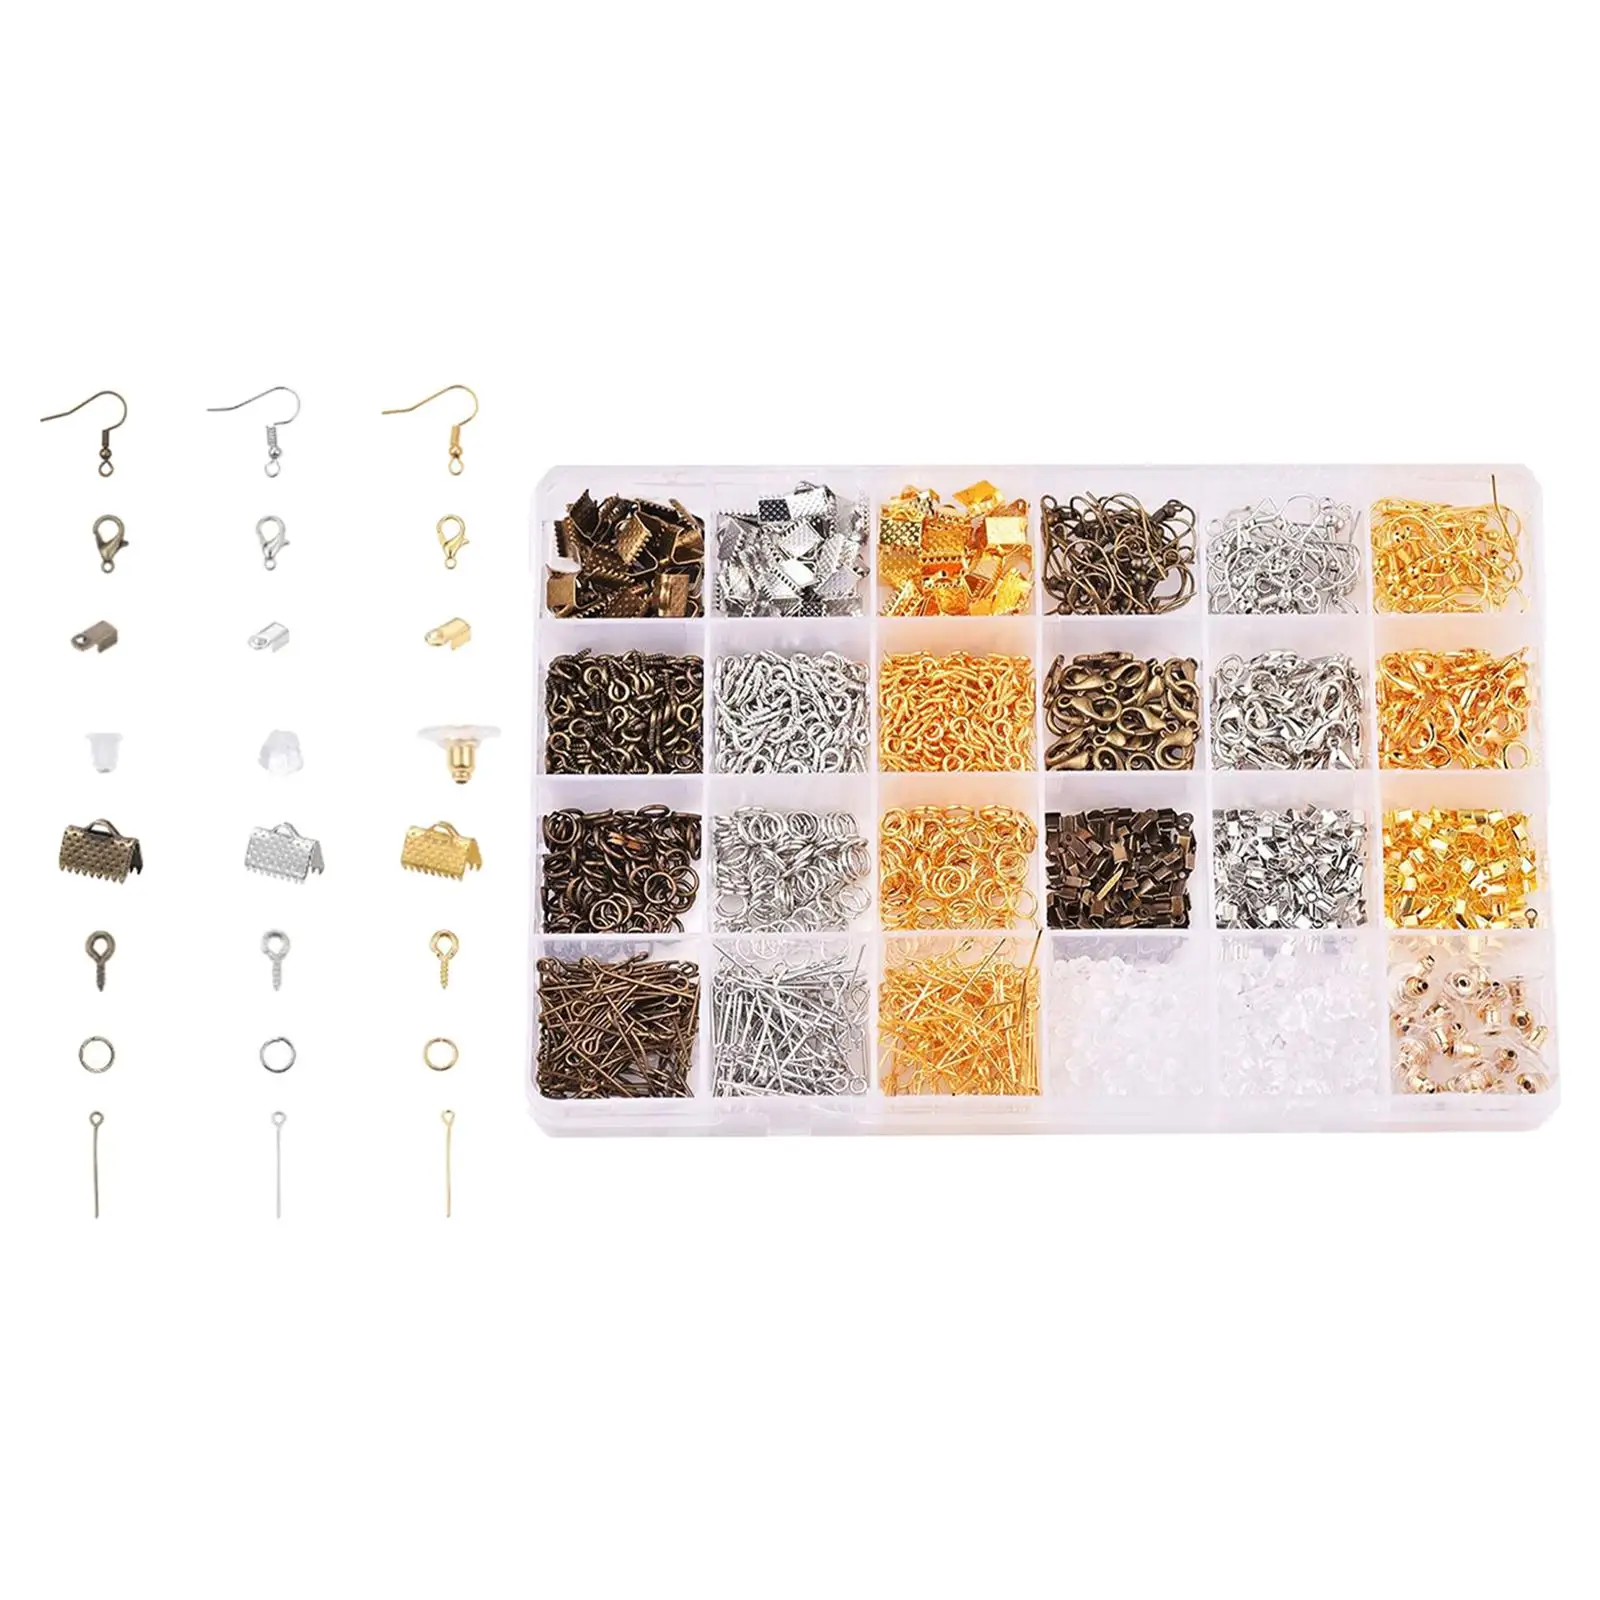 1700x Earring Making Supplies Kit Eye Pins Earring Hooks Earring Finding for Necklace Handmade Crafts Jewelry Making Repair